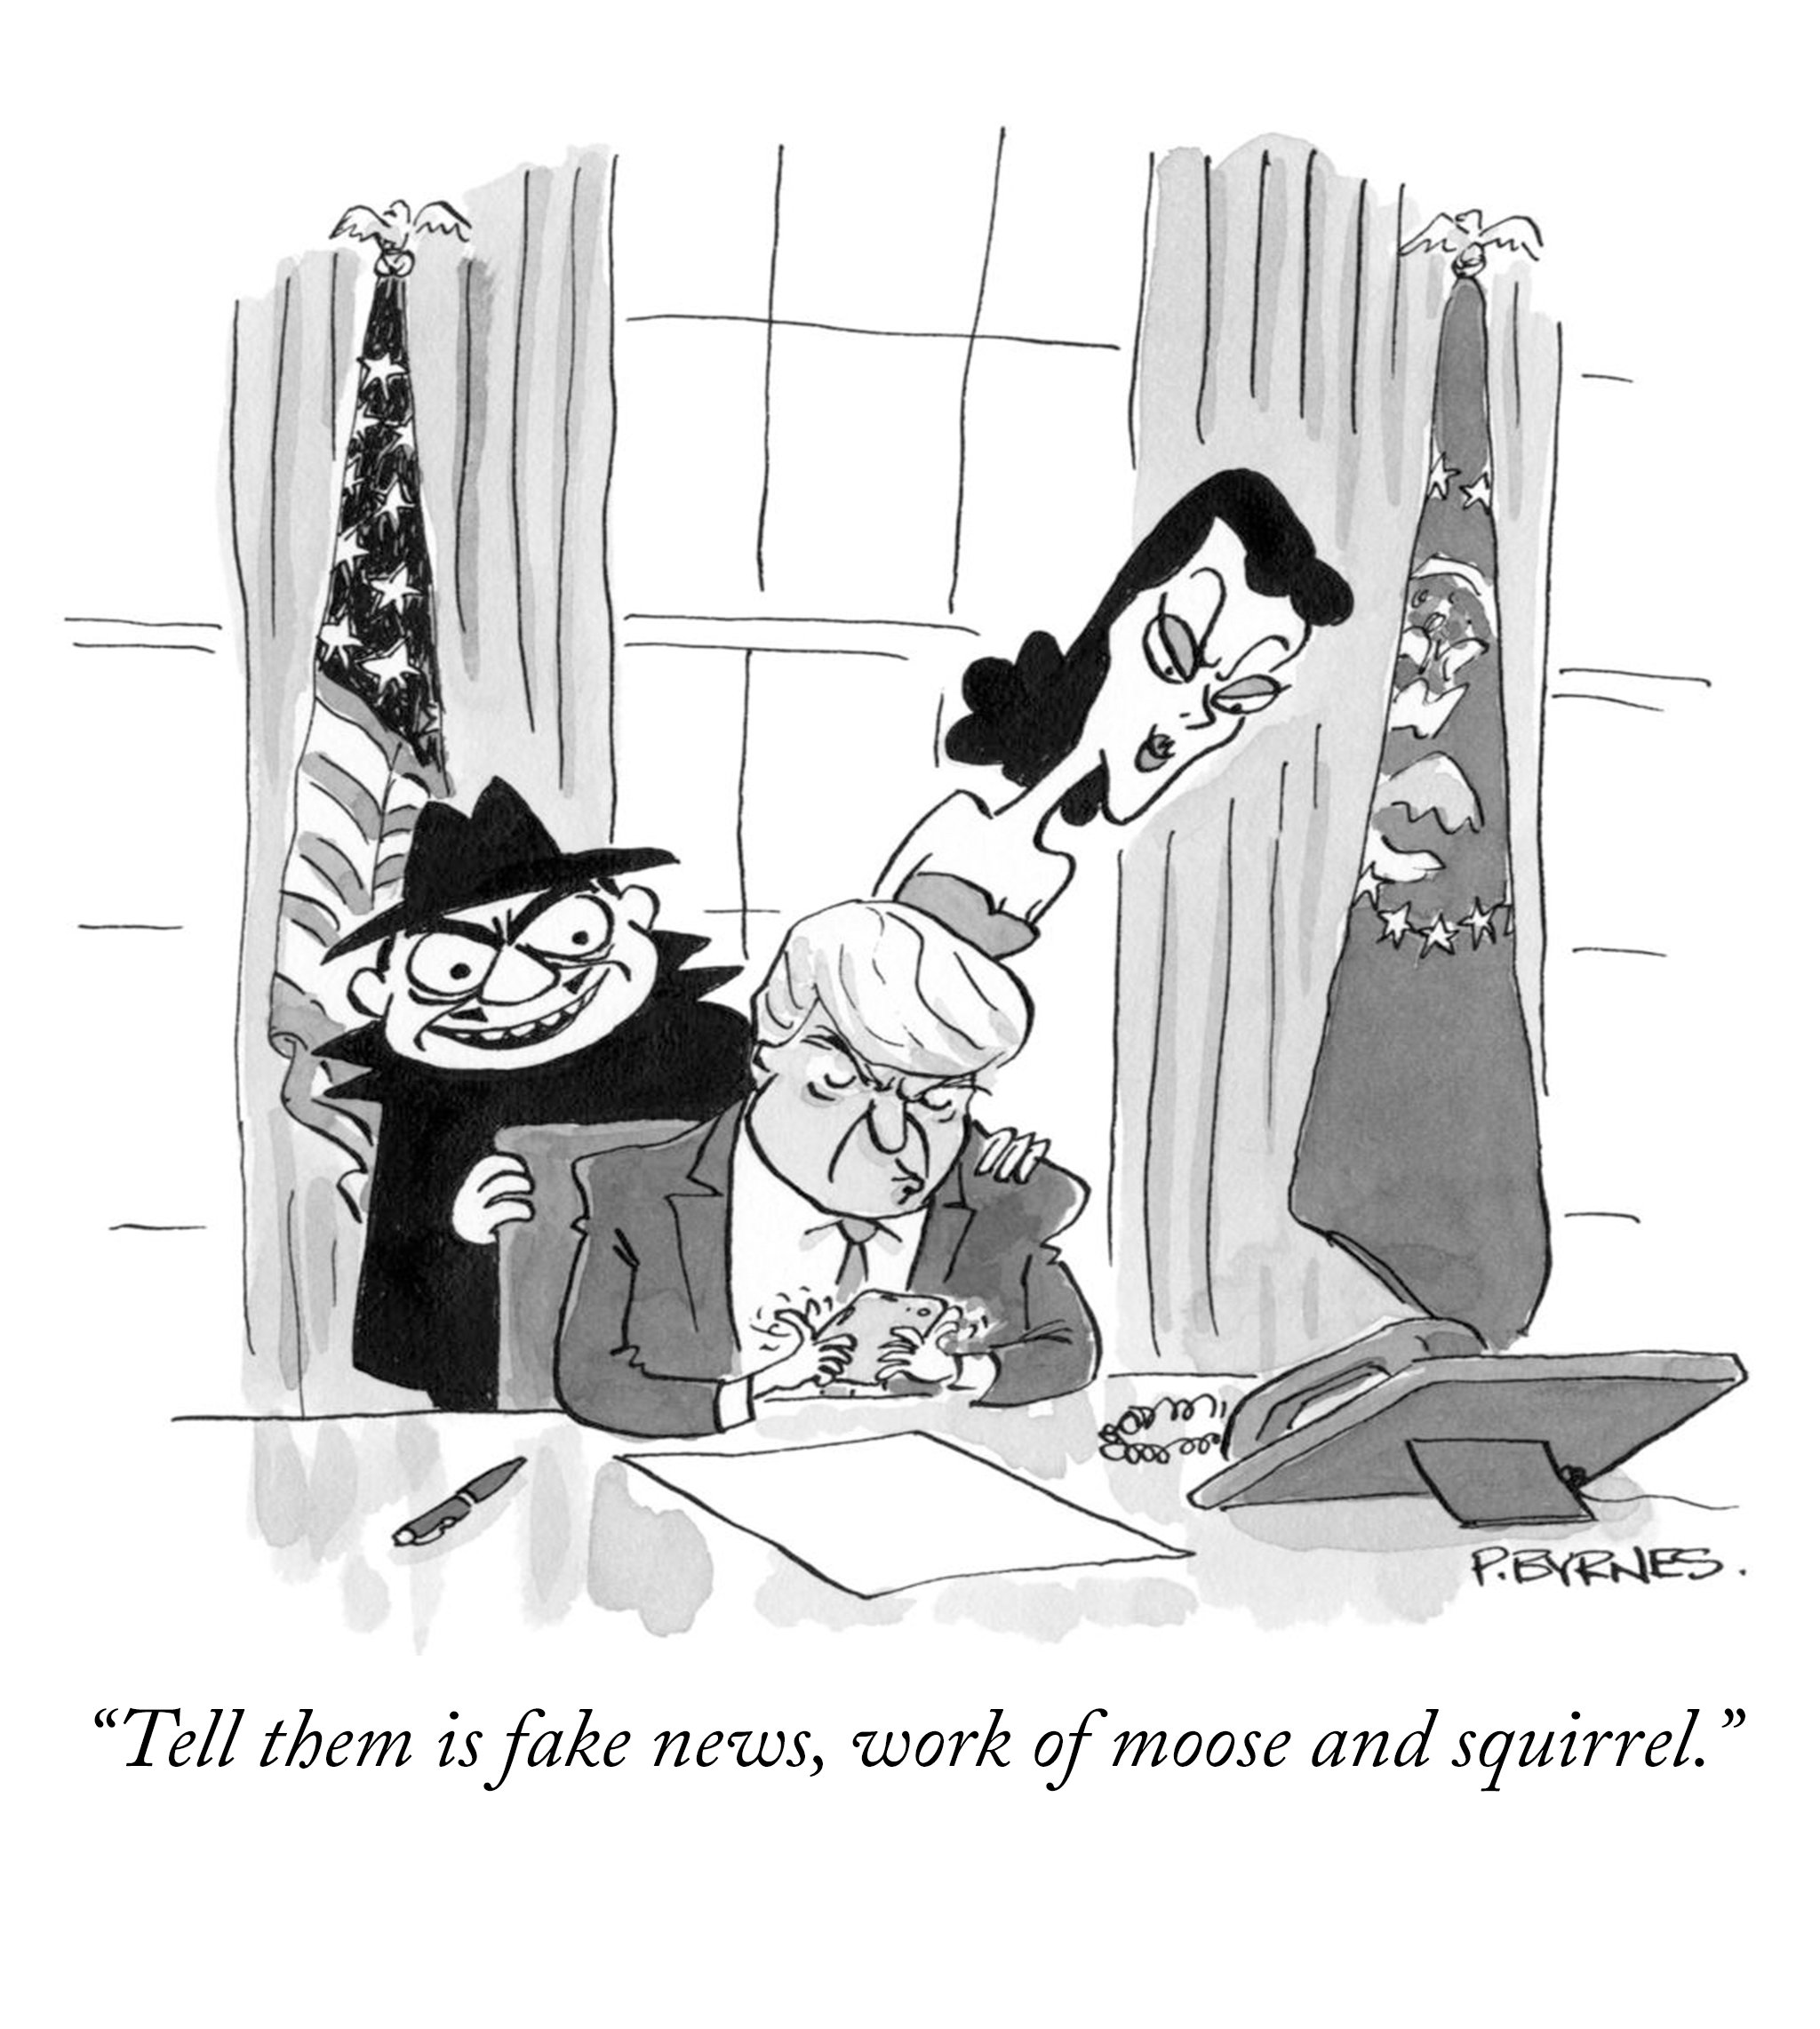 The New Yorker on Twitter: 